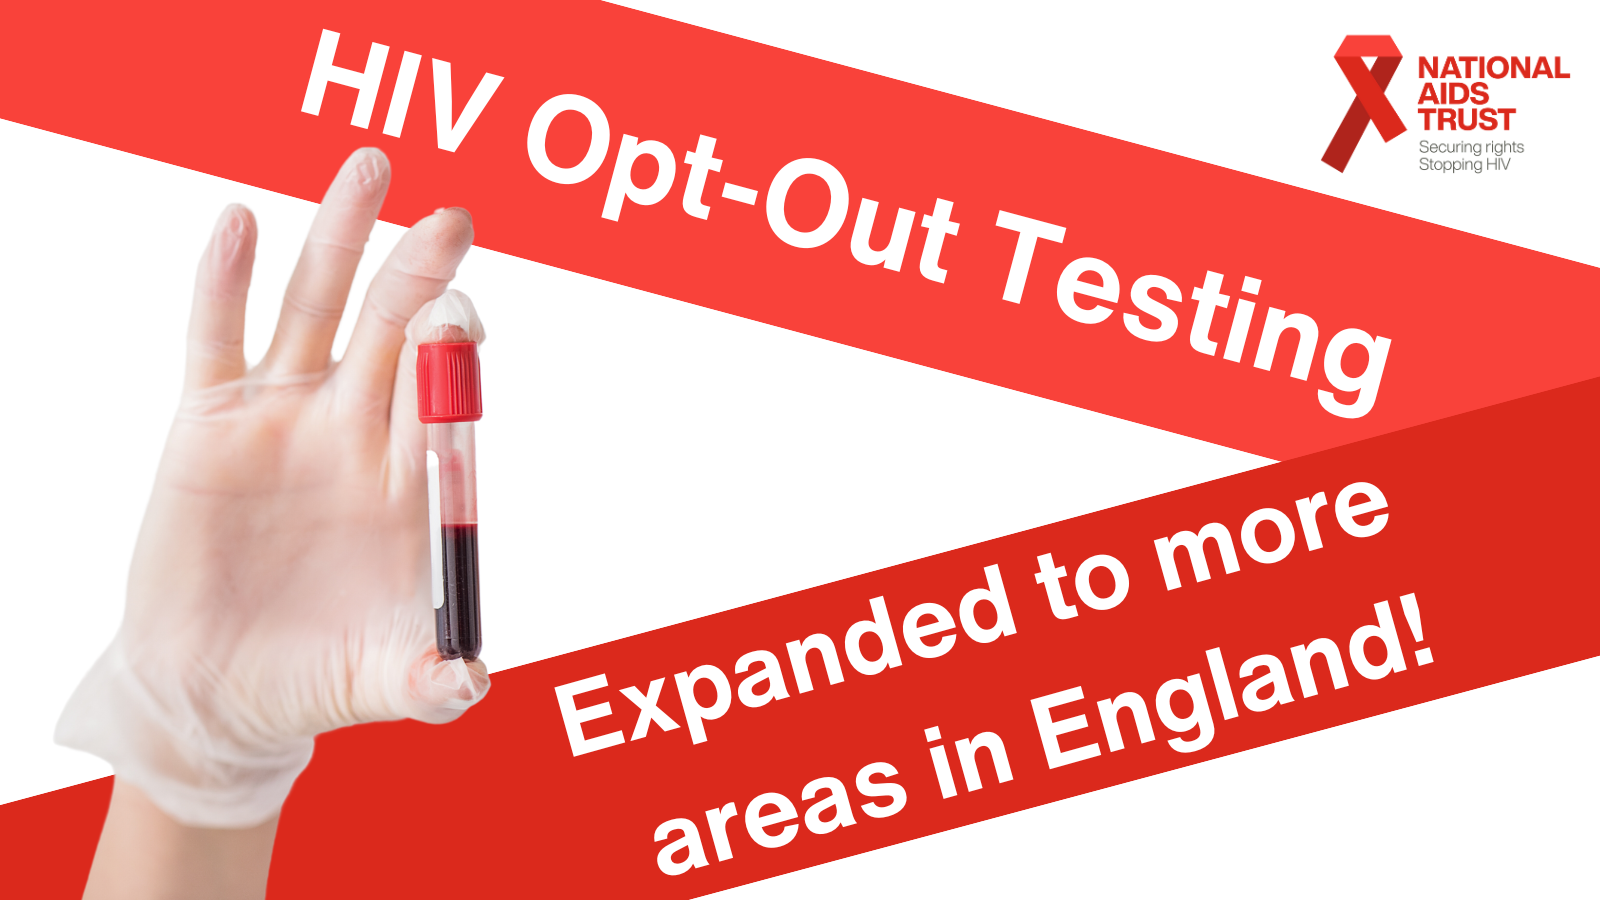 HIV Opt Out Testing expanded to more areas in England